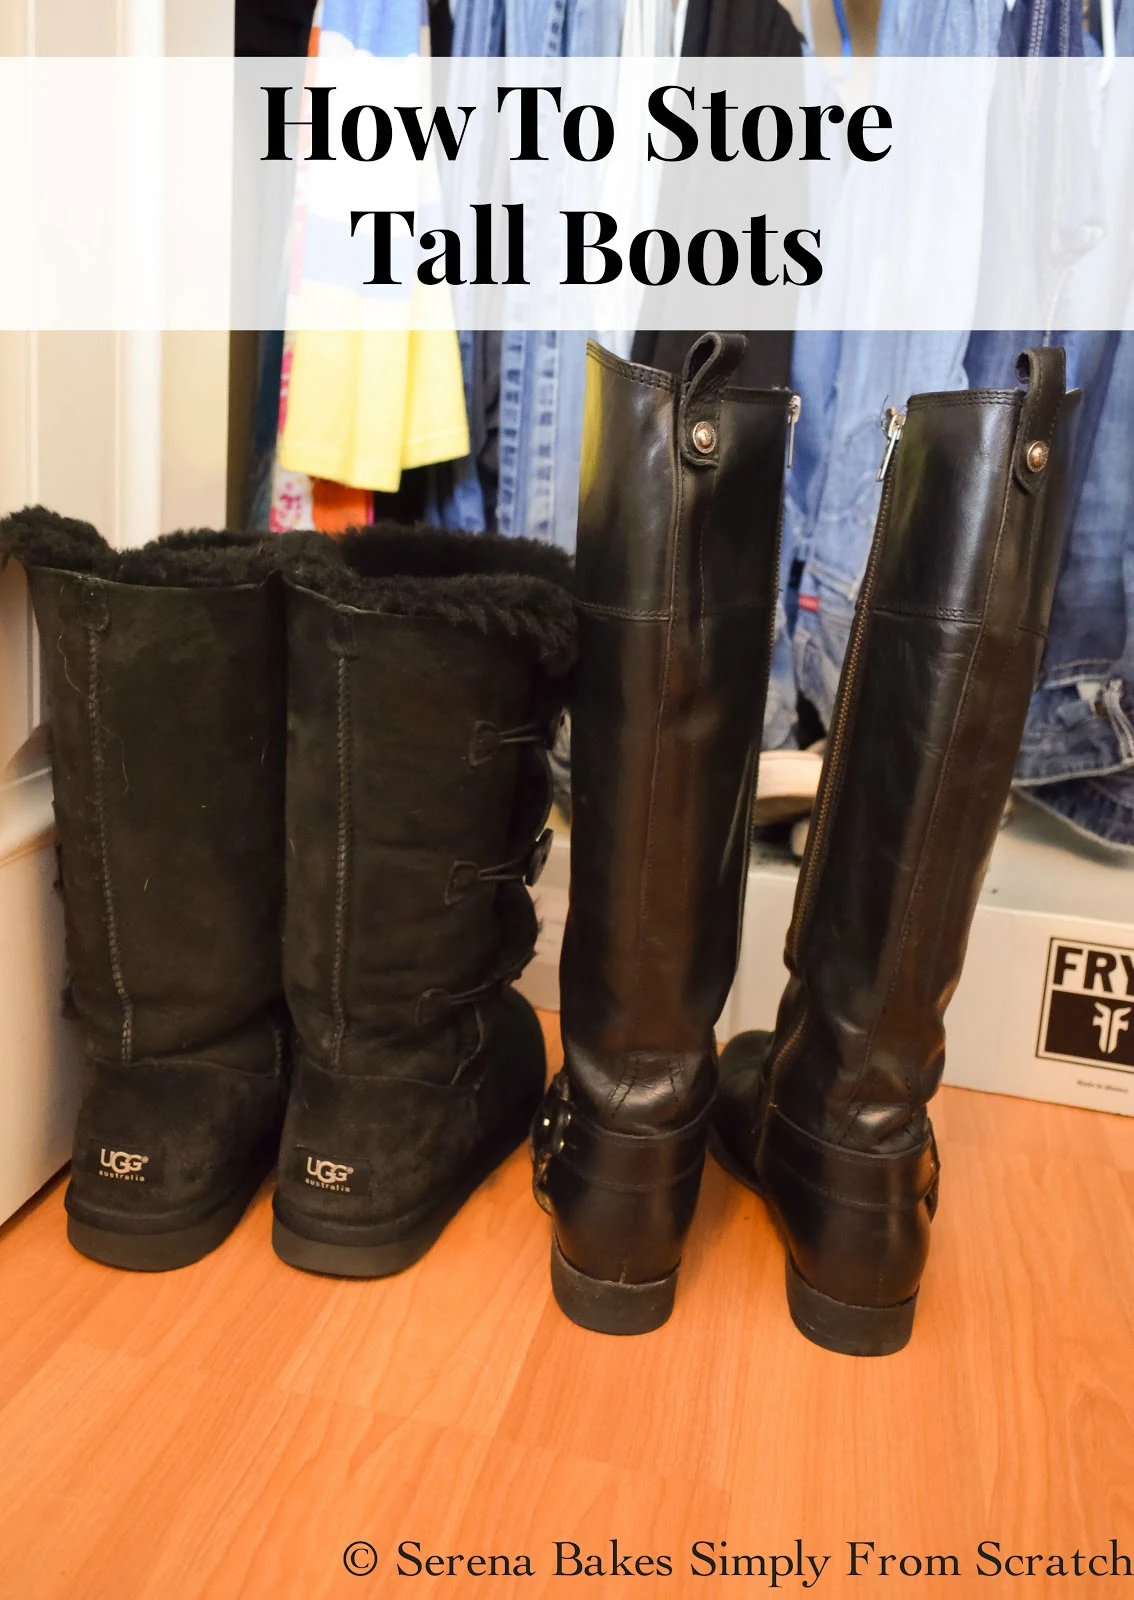 How To Store Tall Boots